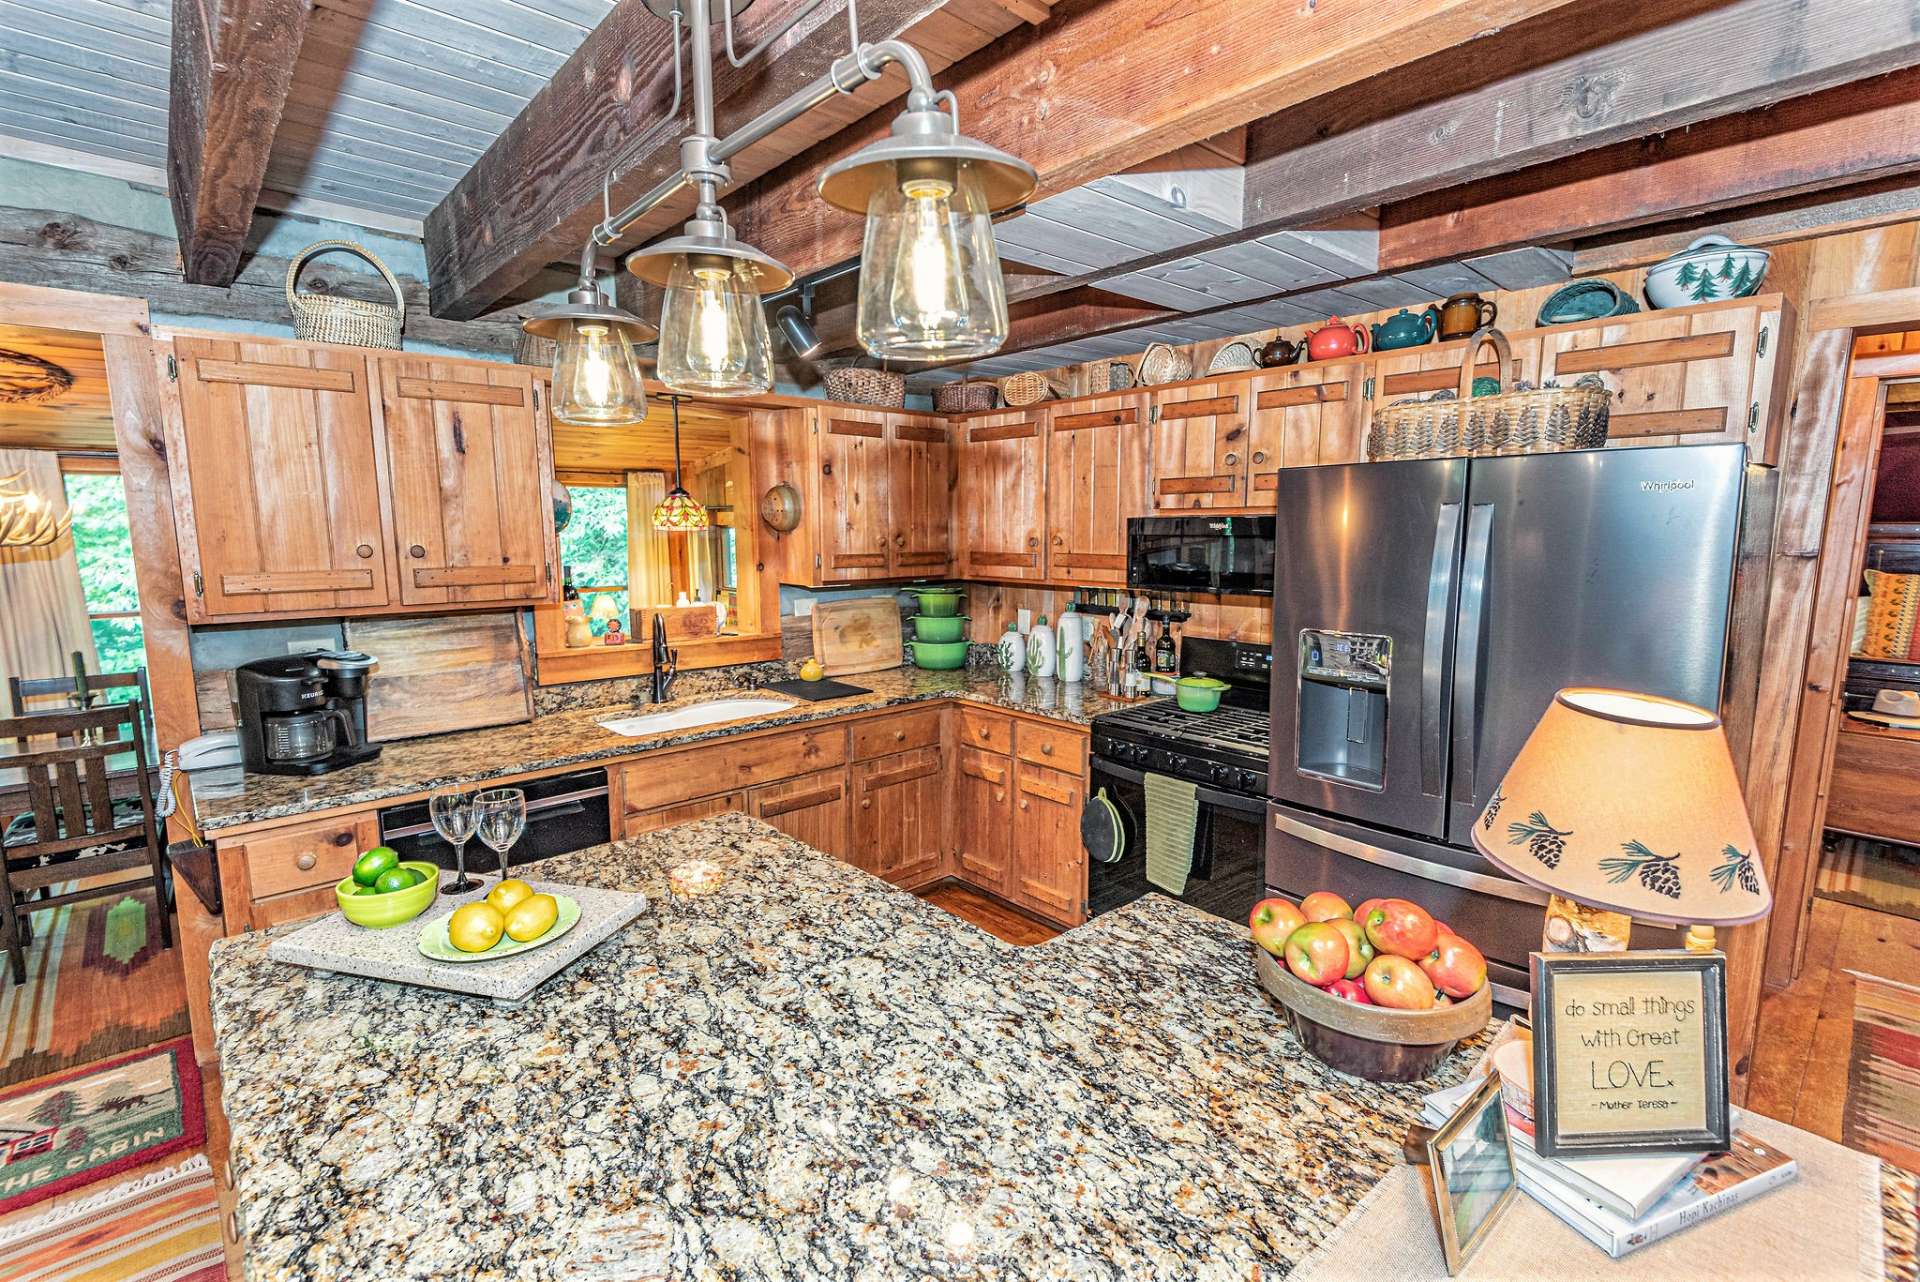 The kitchen has been upgraded with granite countertops with the center island having a special rough edge finish. Cabinets provide plenty of storage with convenient pullout shelving.